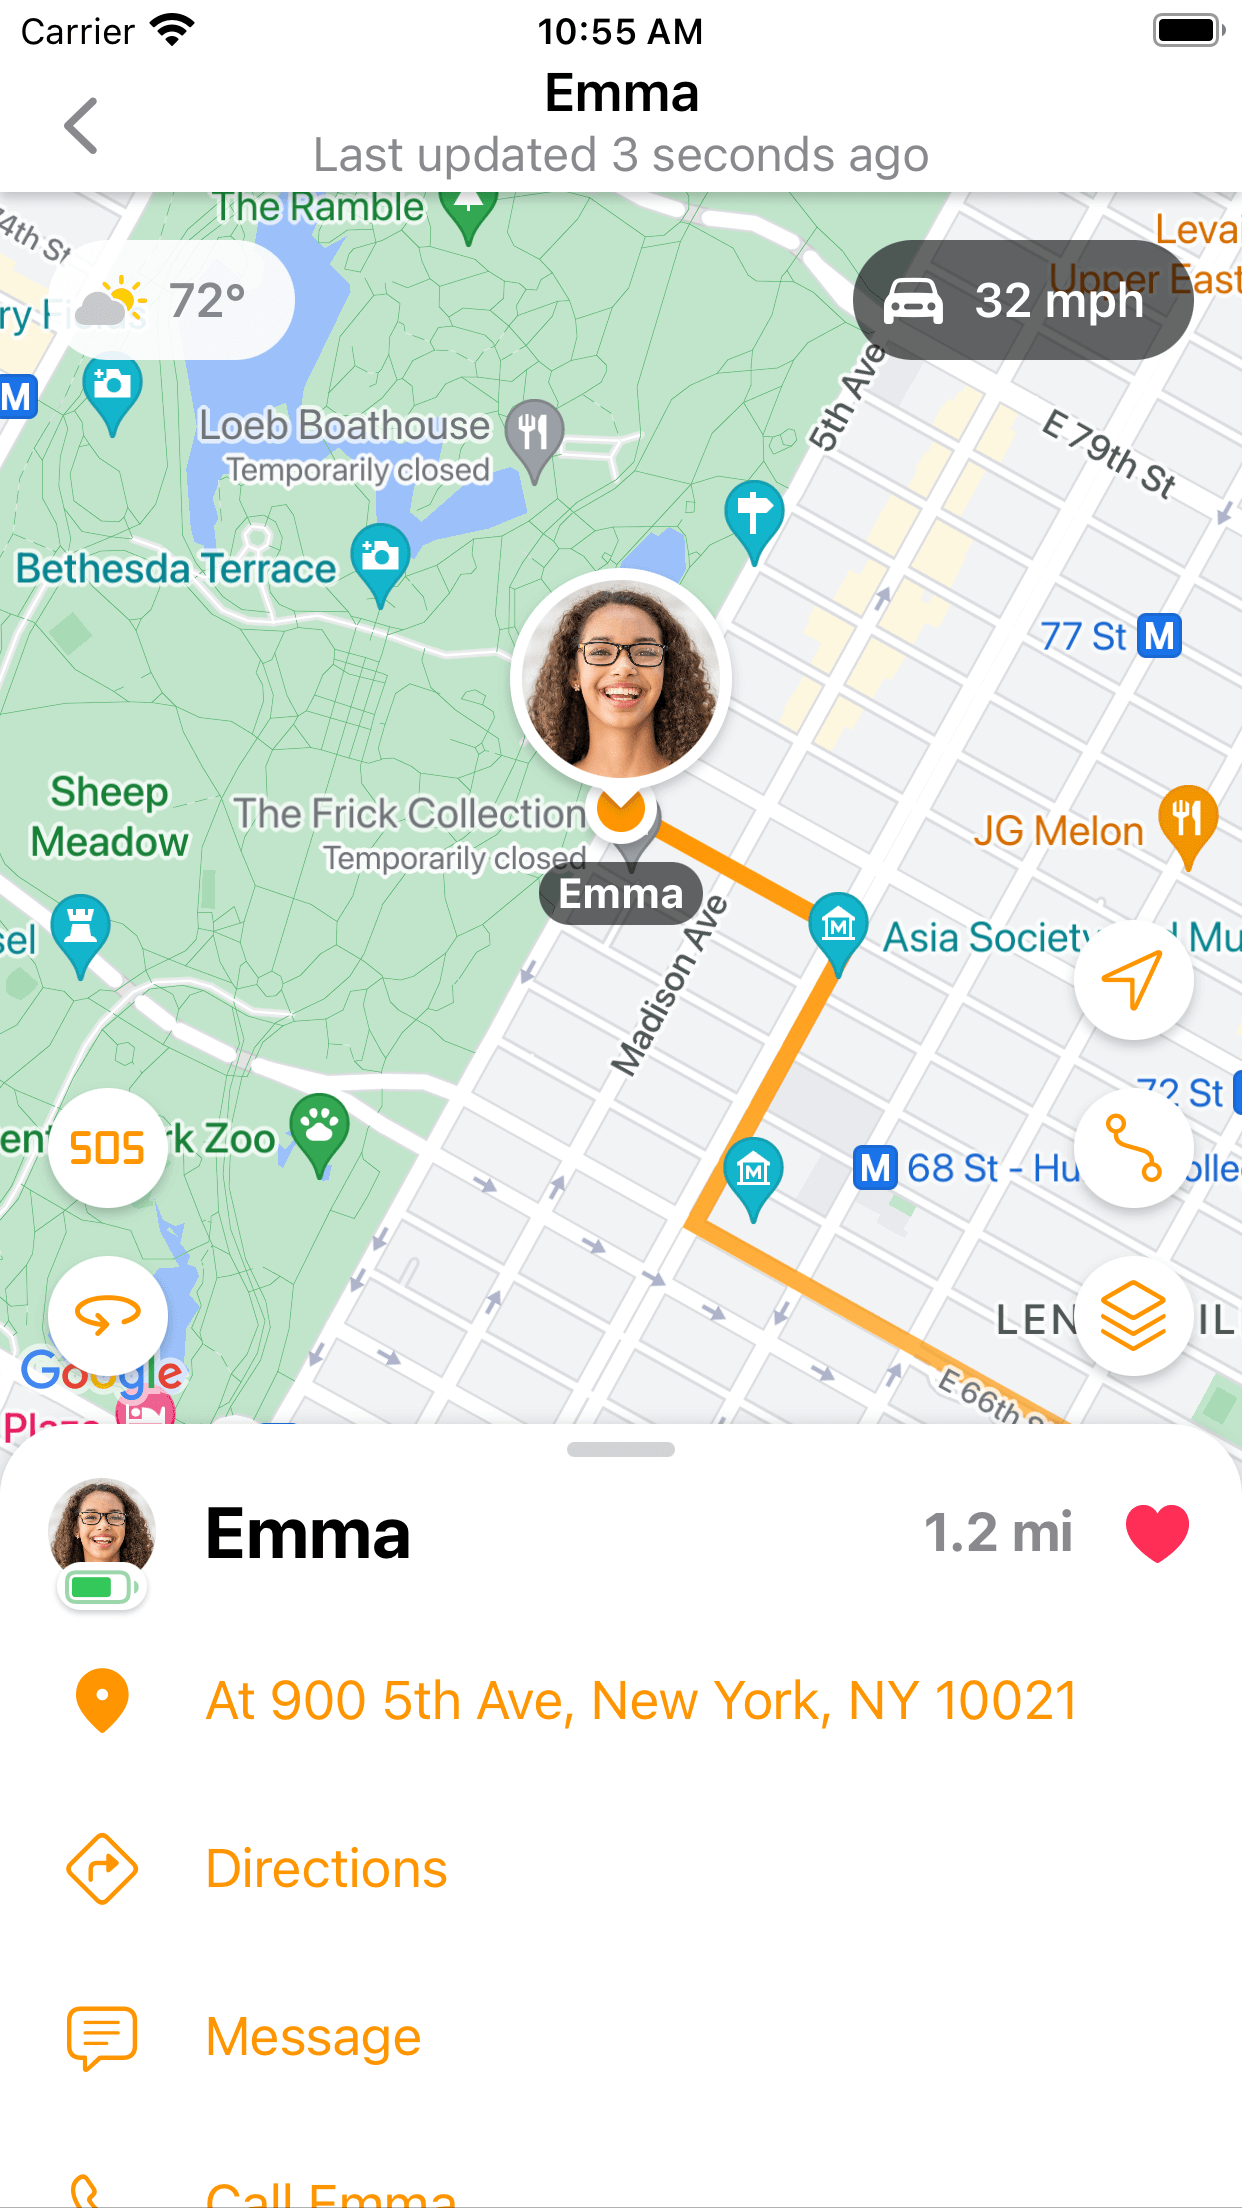 View the exact location of your friends or family members on the map